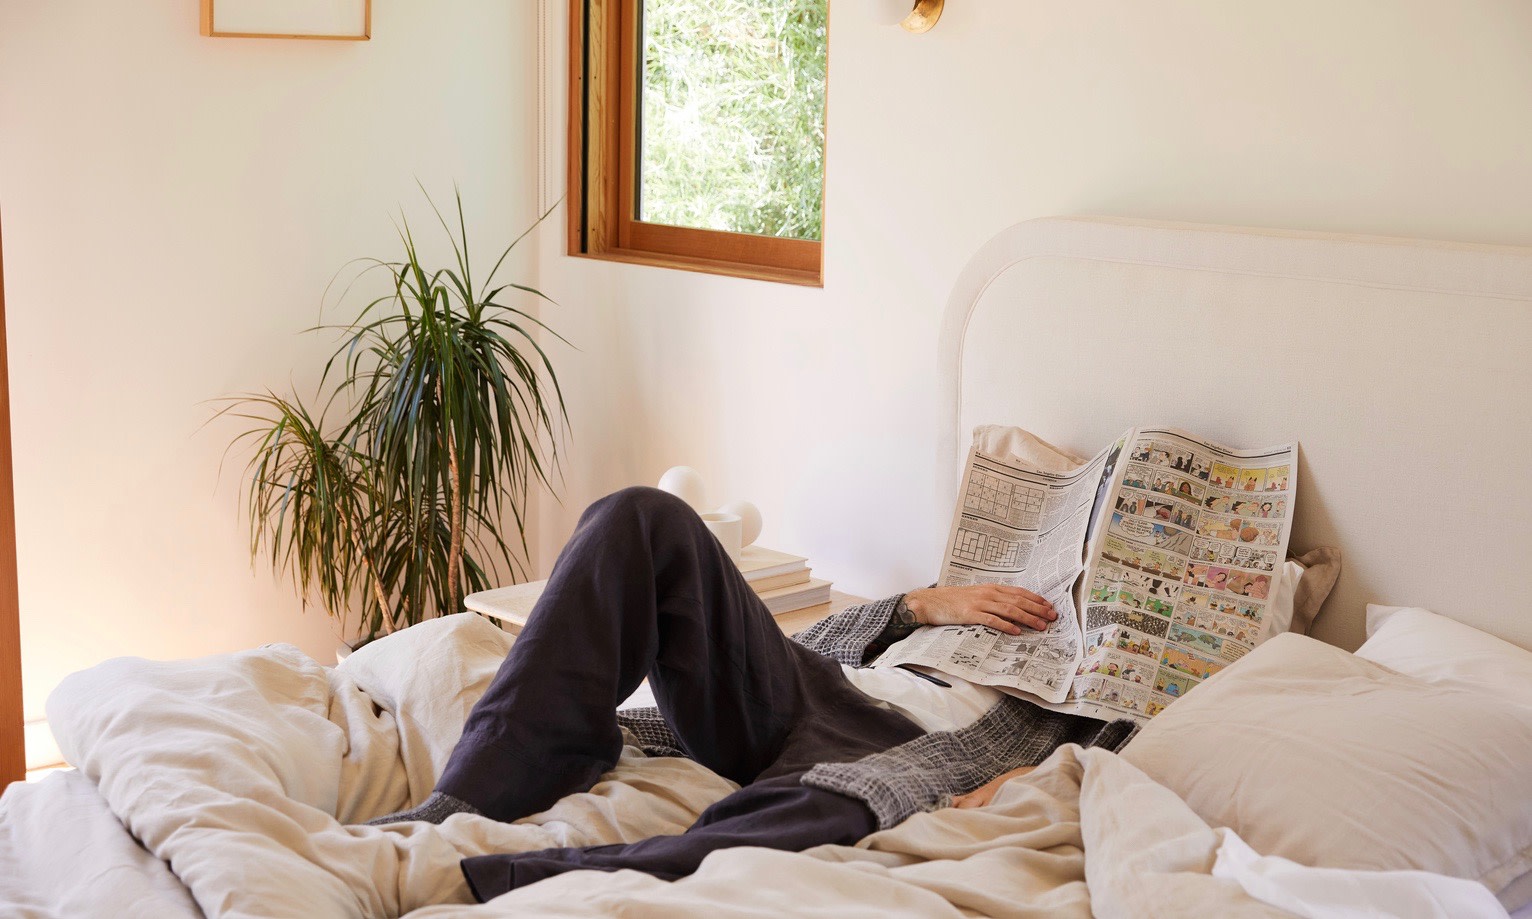 Man in bed with newspaper. 